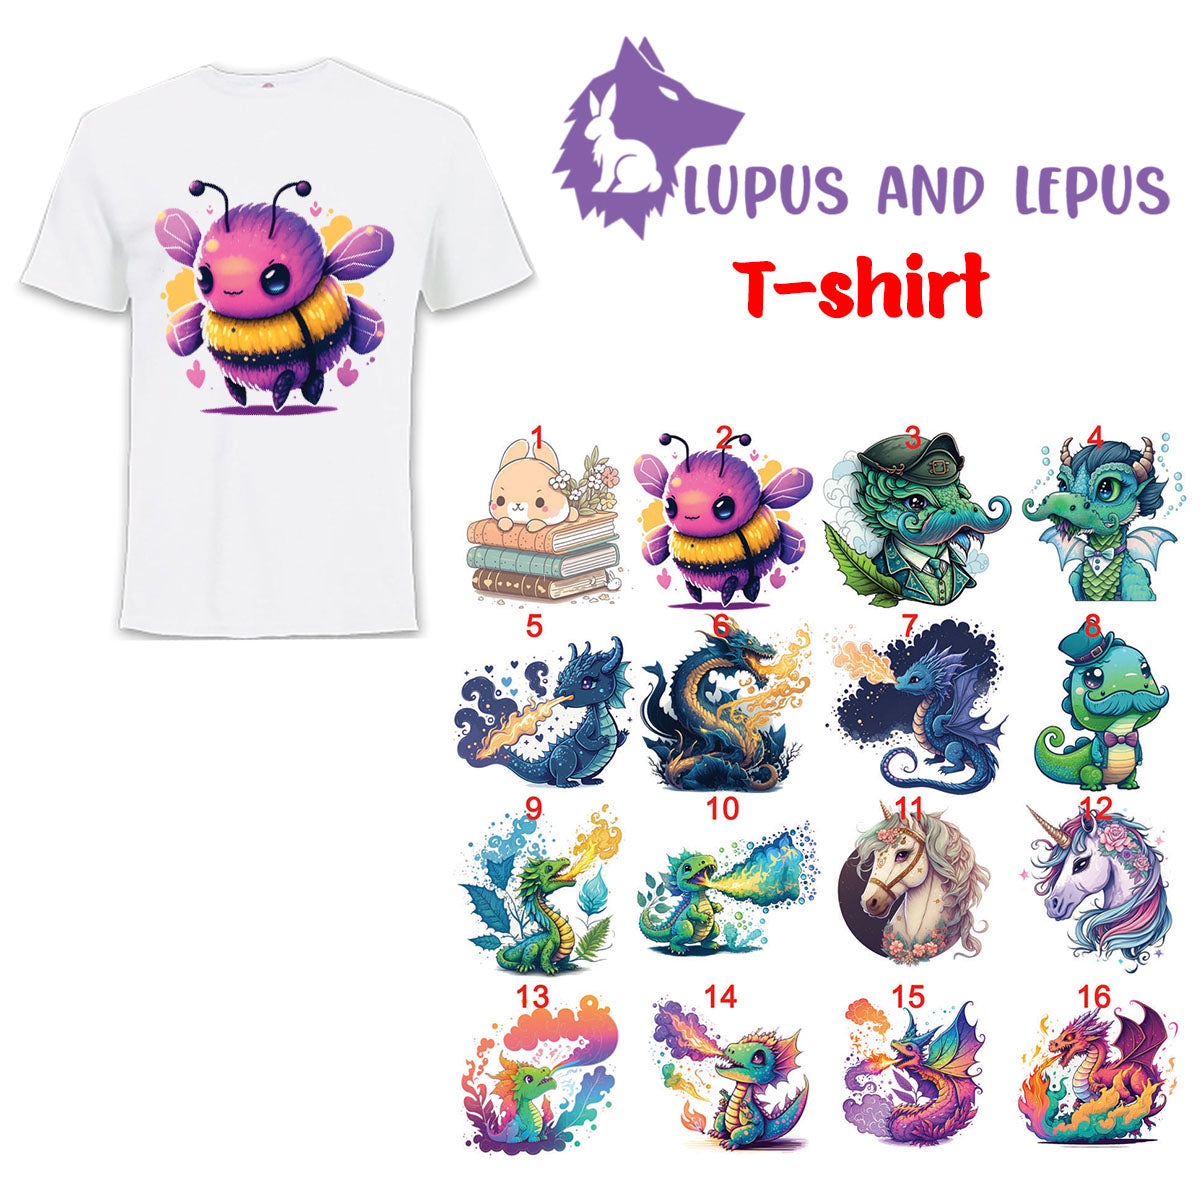 WHITE polyester sublimation tshirt (D)- adult , adult sizes, my art, my designs, dragon, dragons, bunny, cat, kitty, books, nerd, neardy, geek, gamer, game,  sublimated by me